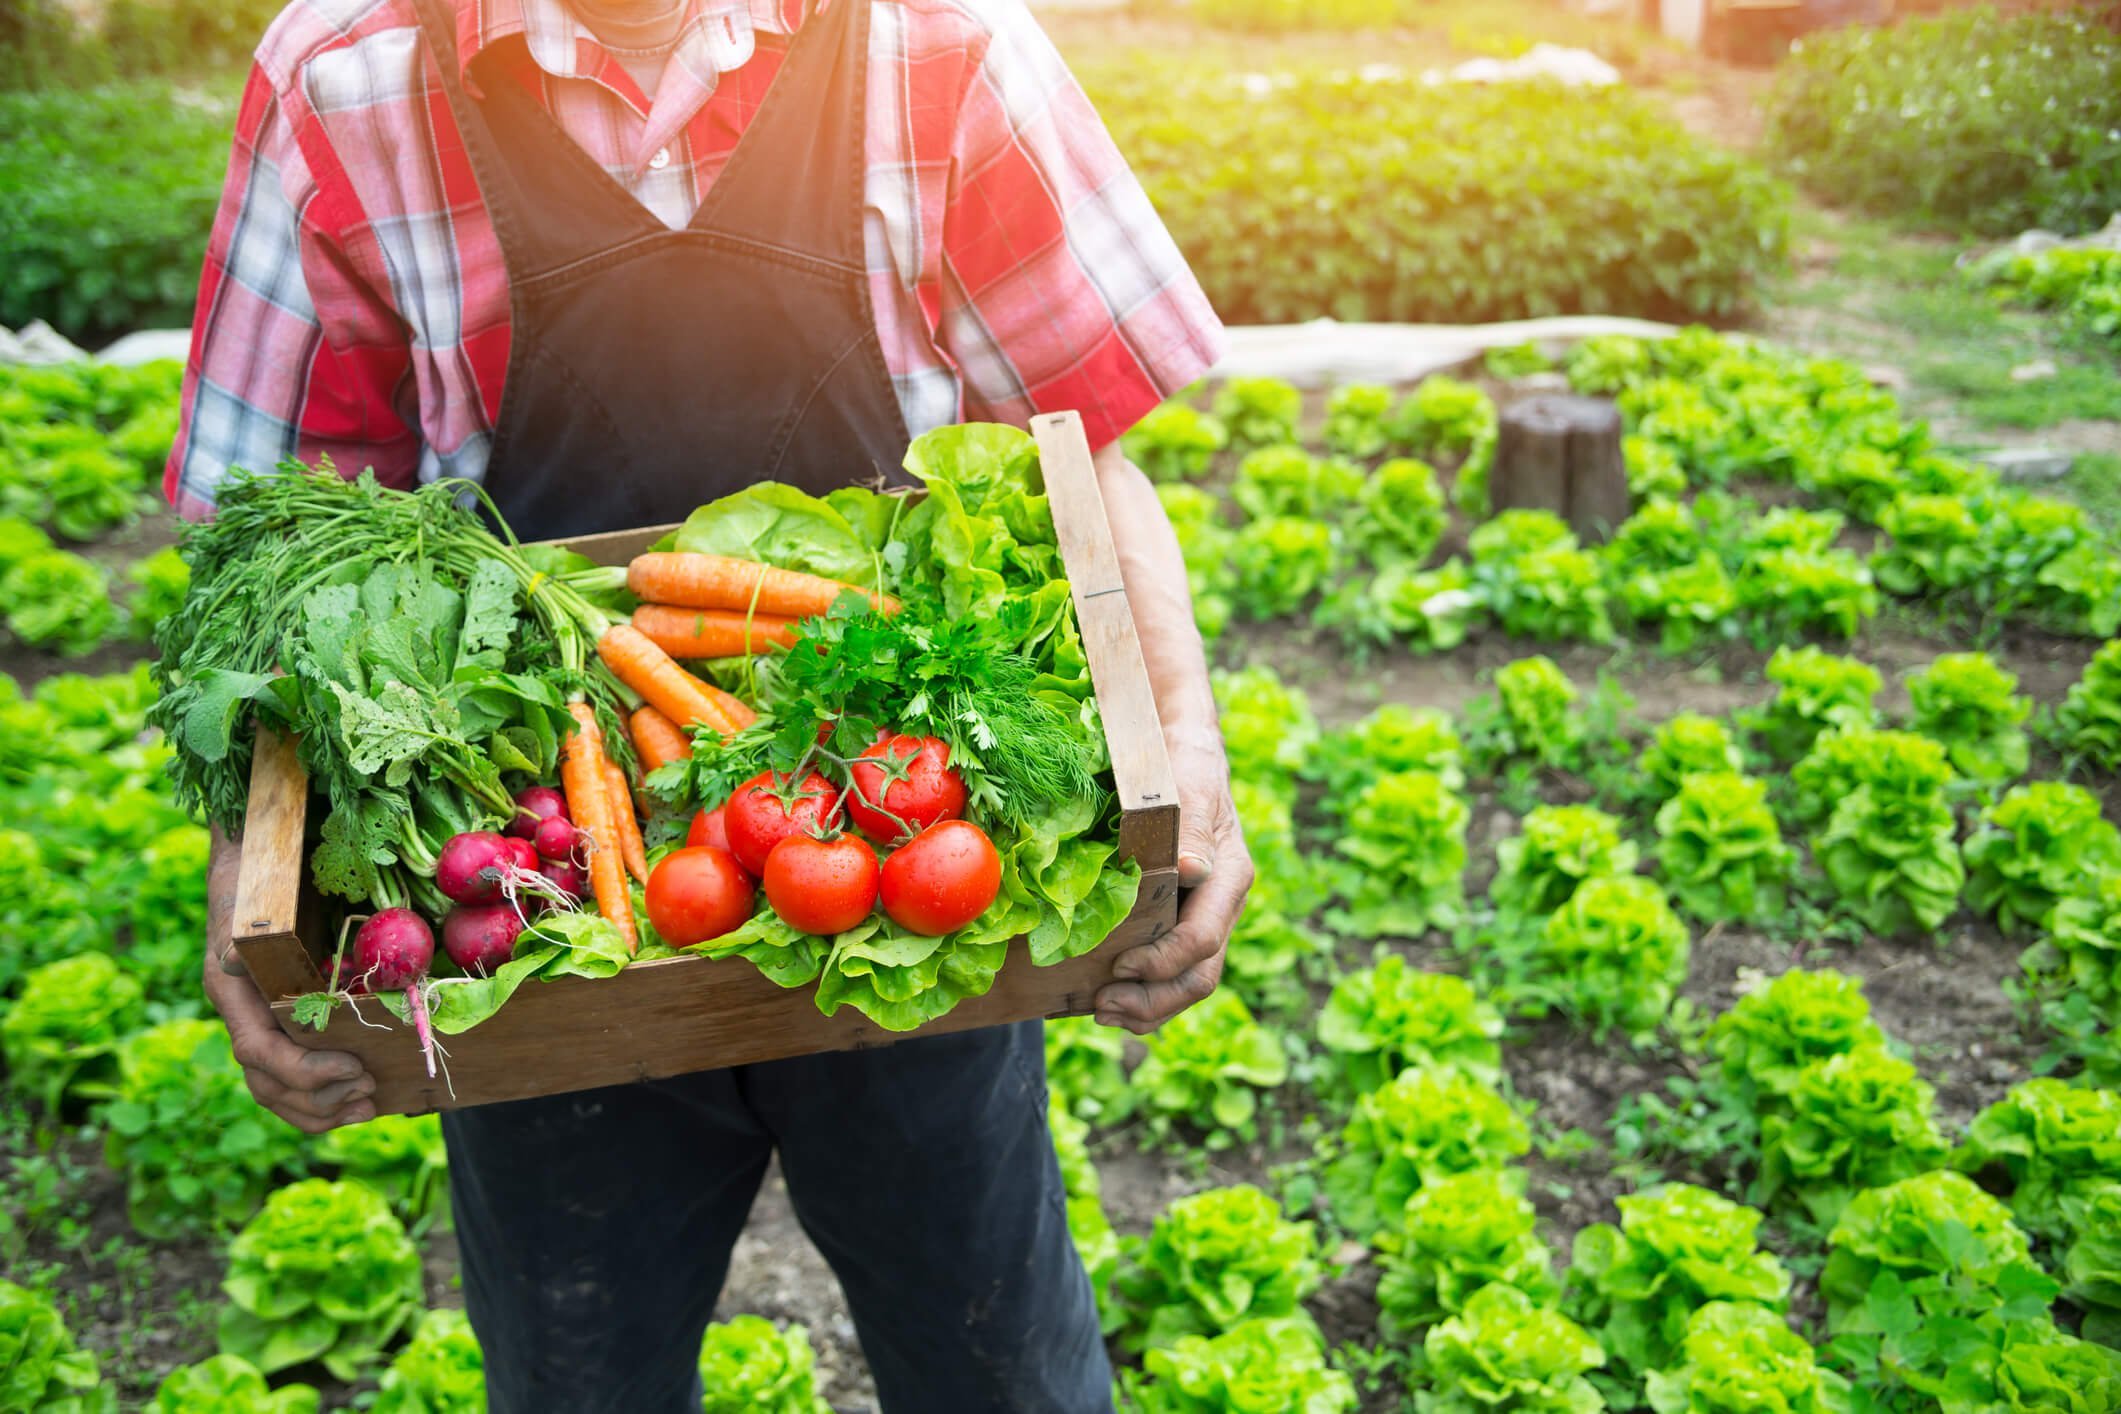 Organic Food Prices: Is Buying Organic Worth The Cost?